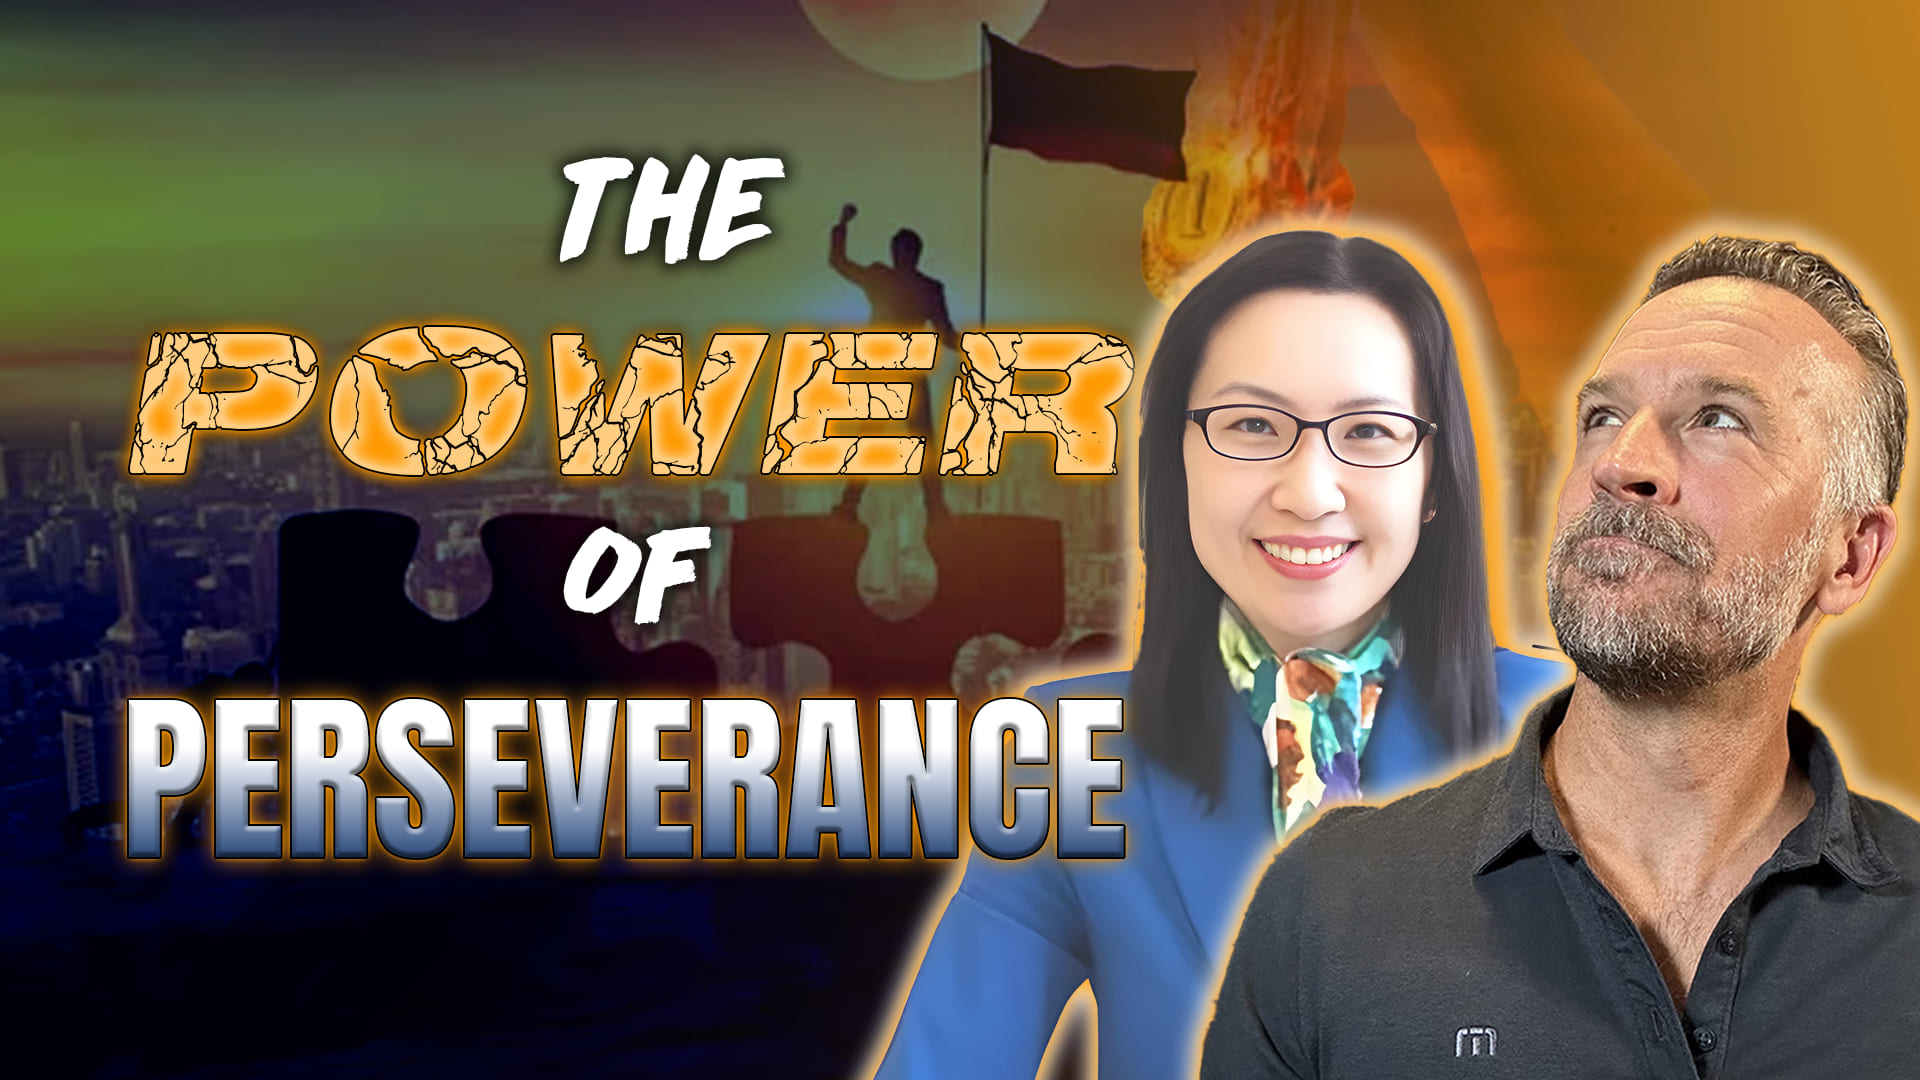 Flow Over Fear: The Power of Perseverance